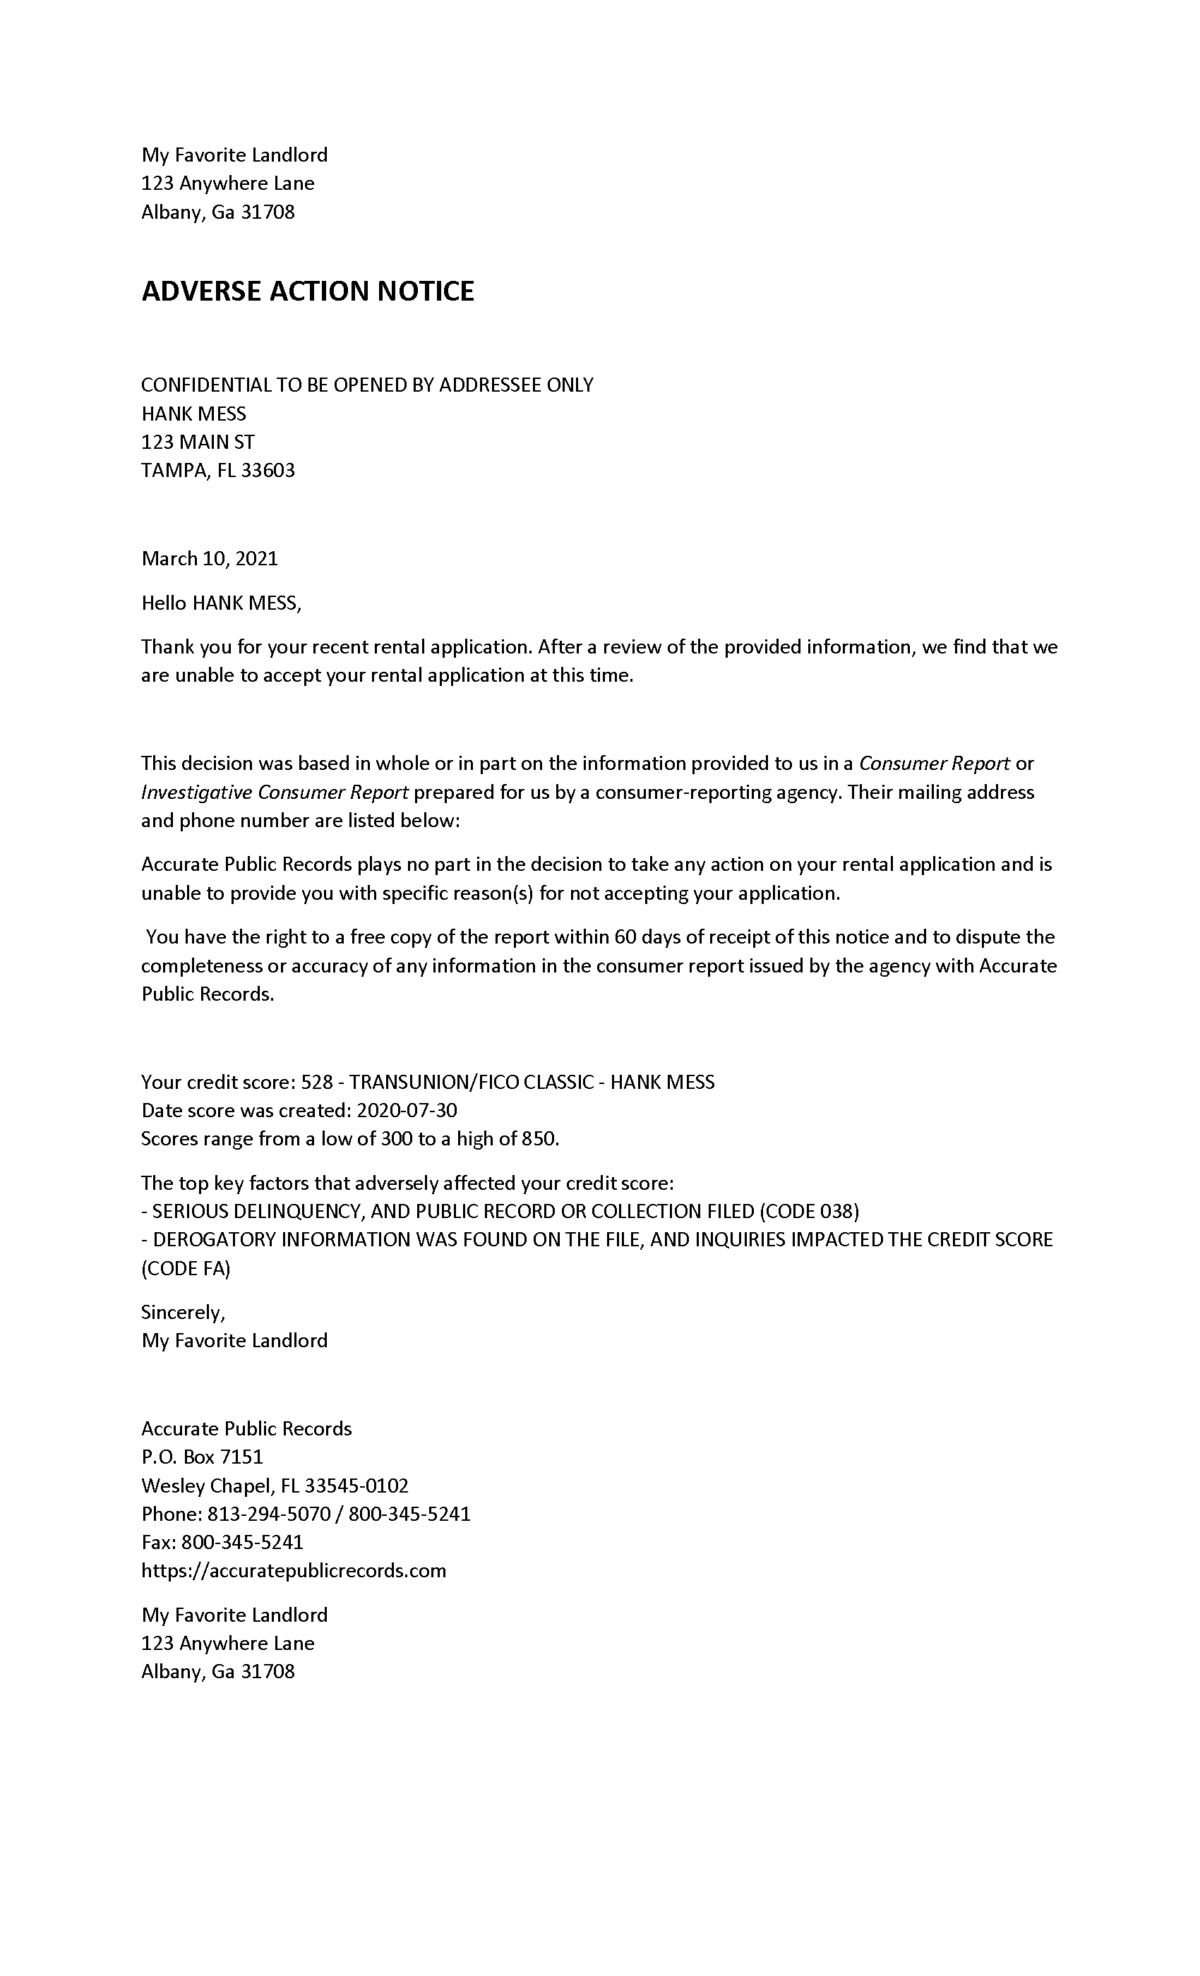 Adverse Action Notice - Nonspecific Tenant Denial Letter